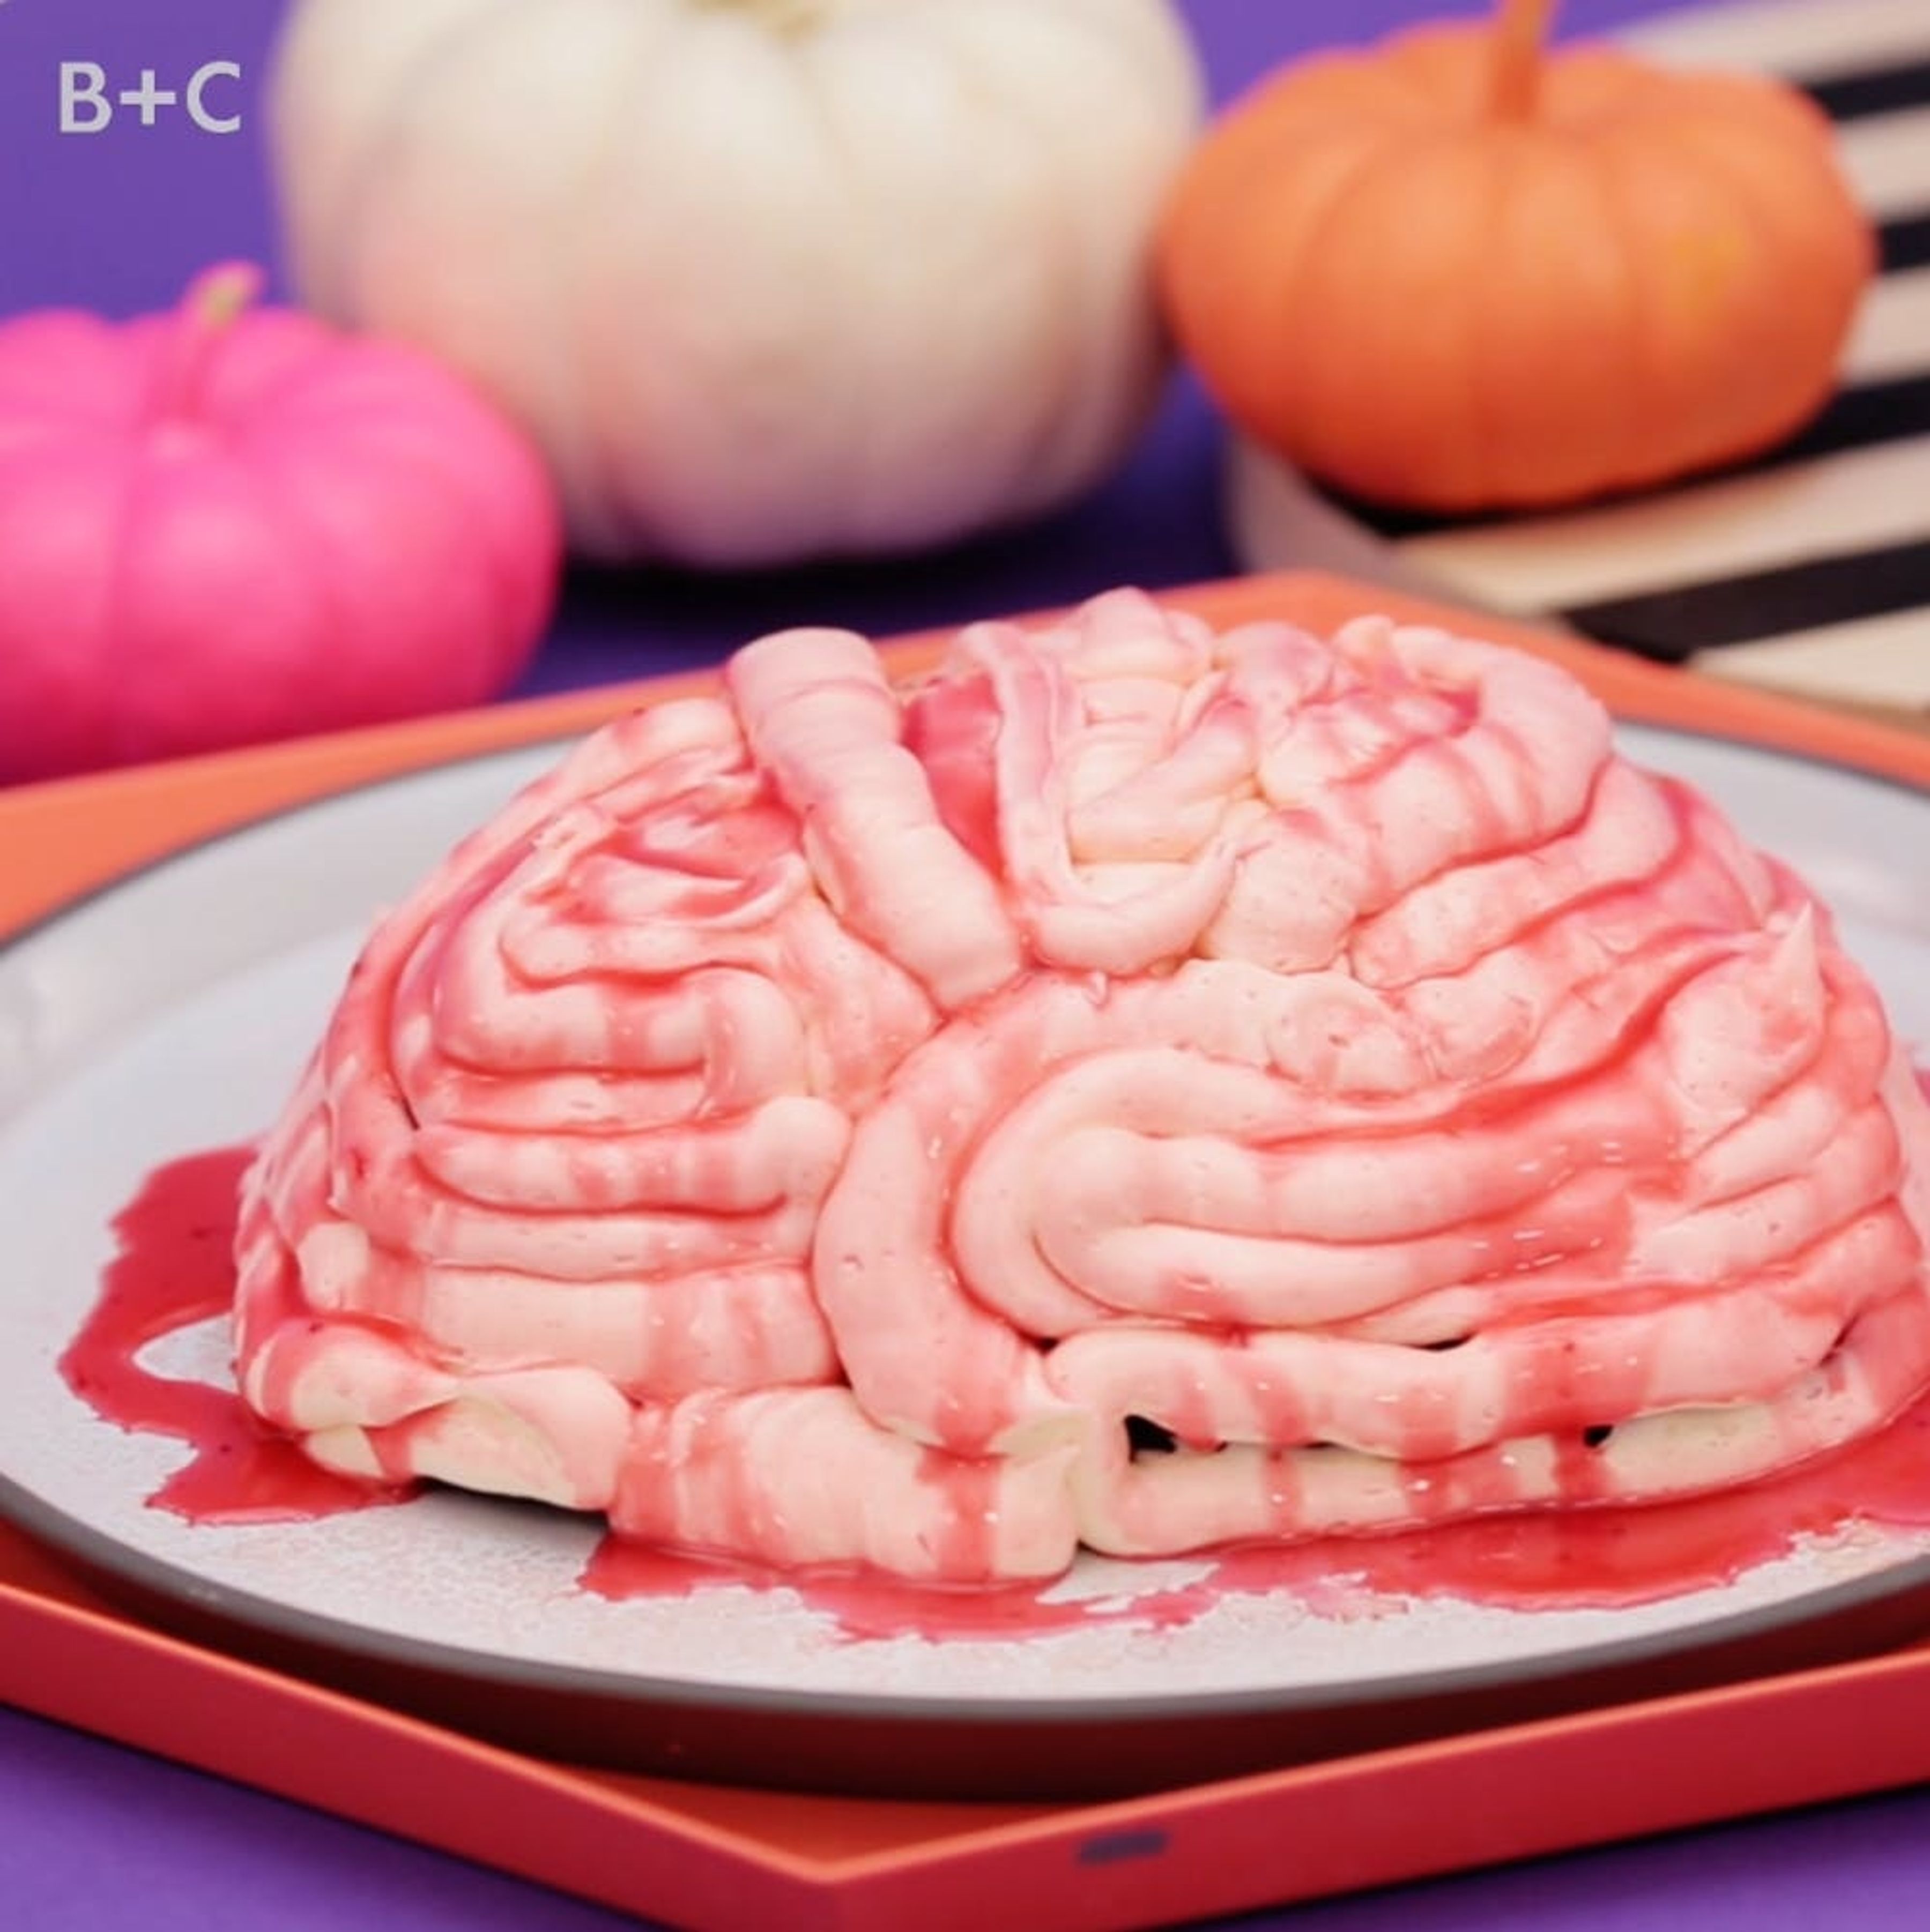 Step by Step Tutorial on how to make a Halloween Brain Cake - Sherbakes